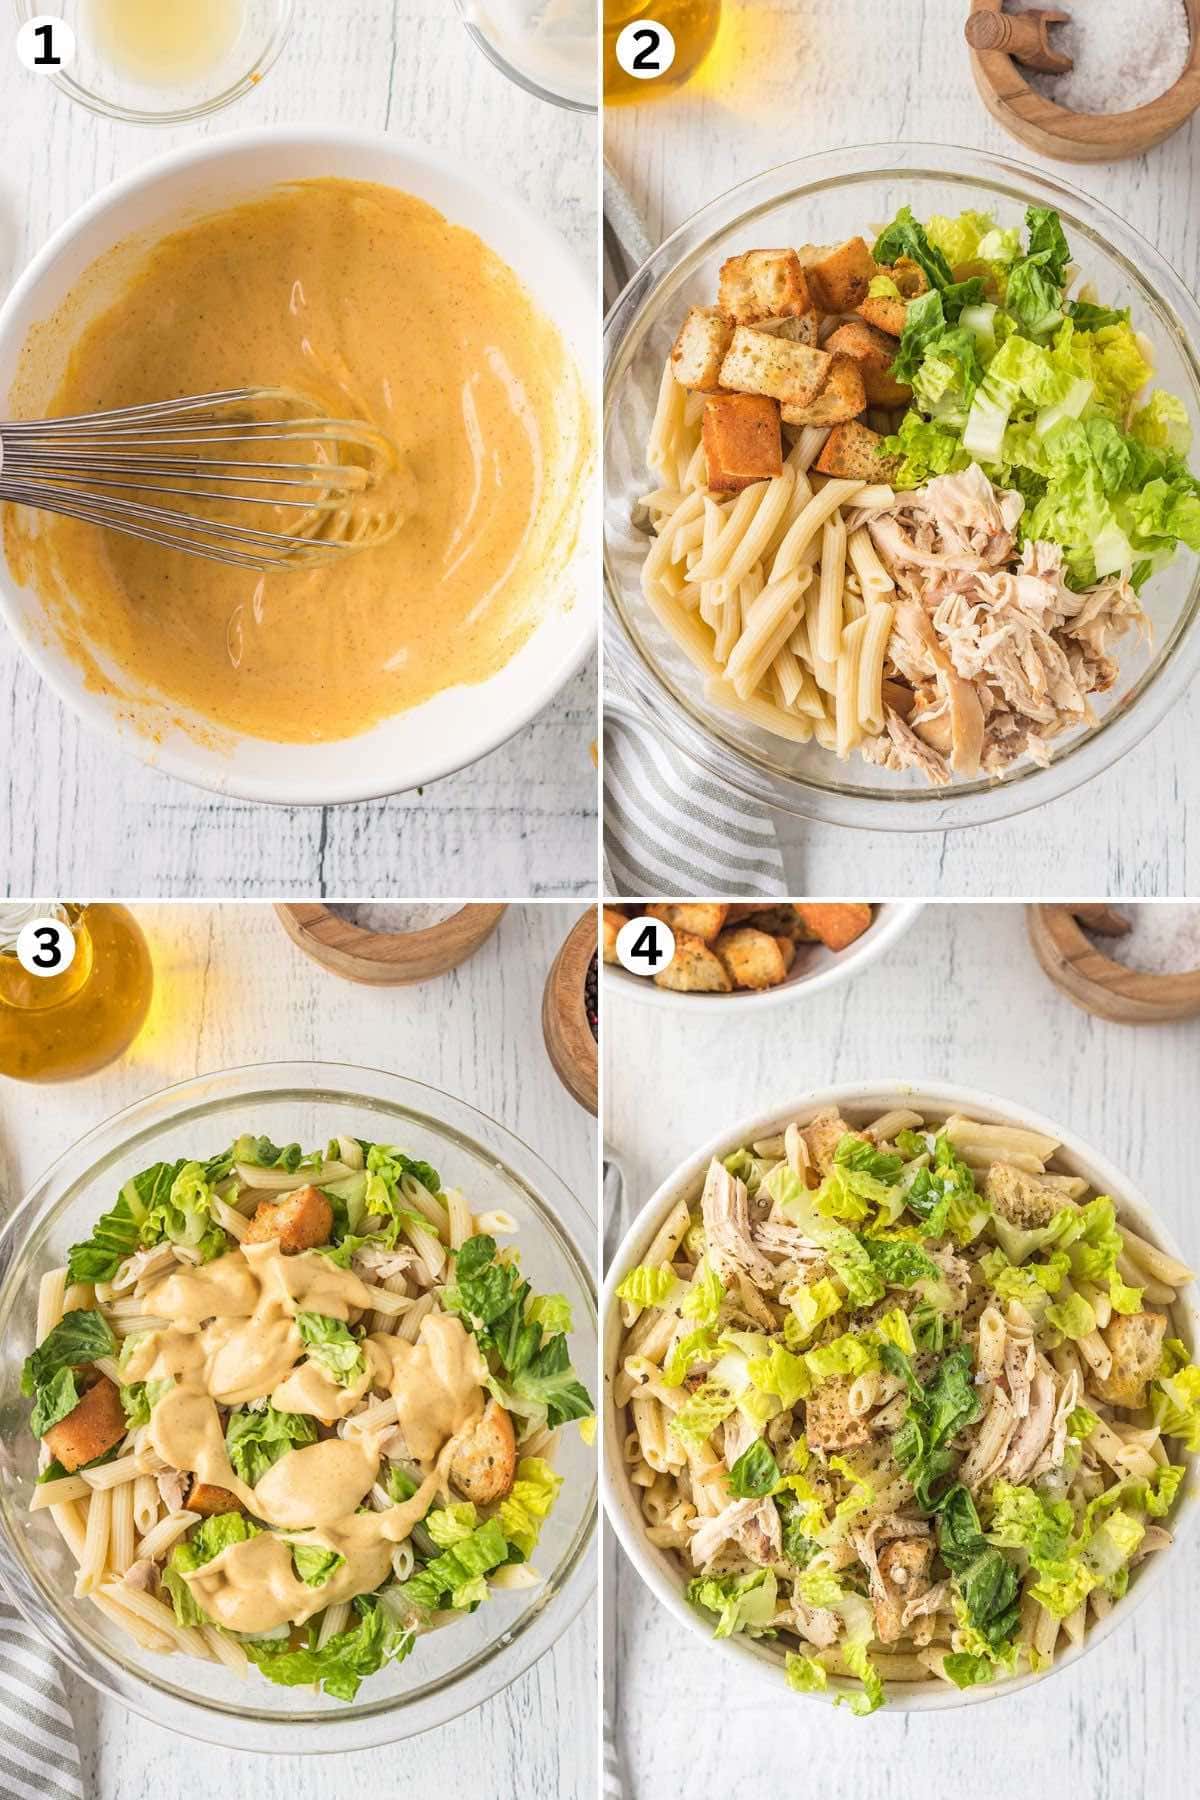 Prepare the dressing. In a mixing bowl, combine the cooked pasta, rotisserie chicken, Romaine lettuce, and croutons. Pour the Caesar dressing over salad. Garnish with grated Parmesan cheese and black pepper.